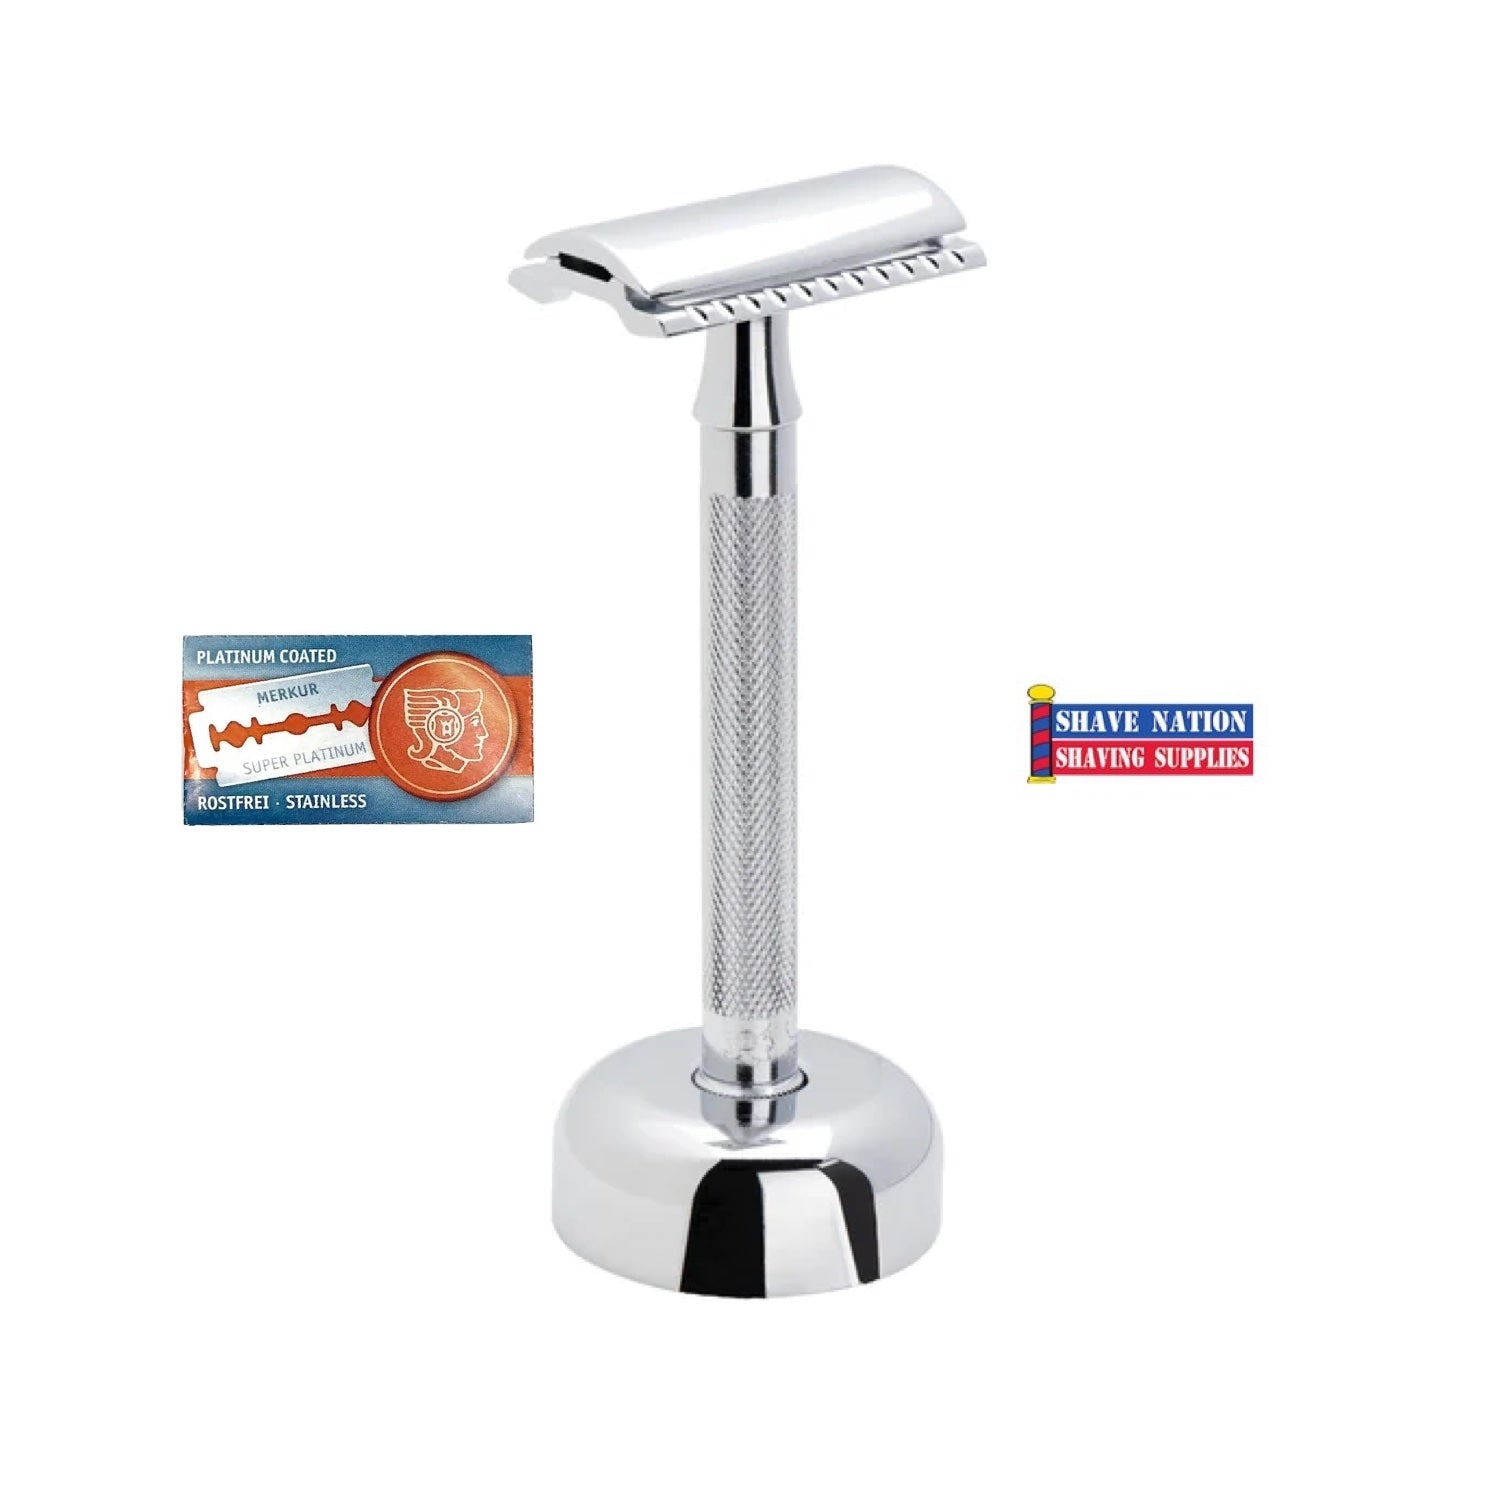 Merkur 23C Safety Razor Set with Stand and Blades